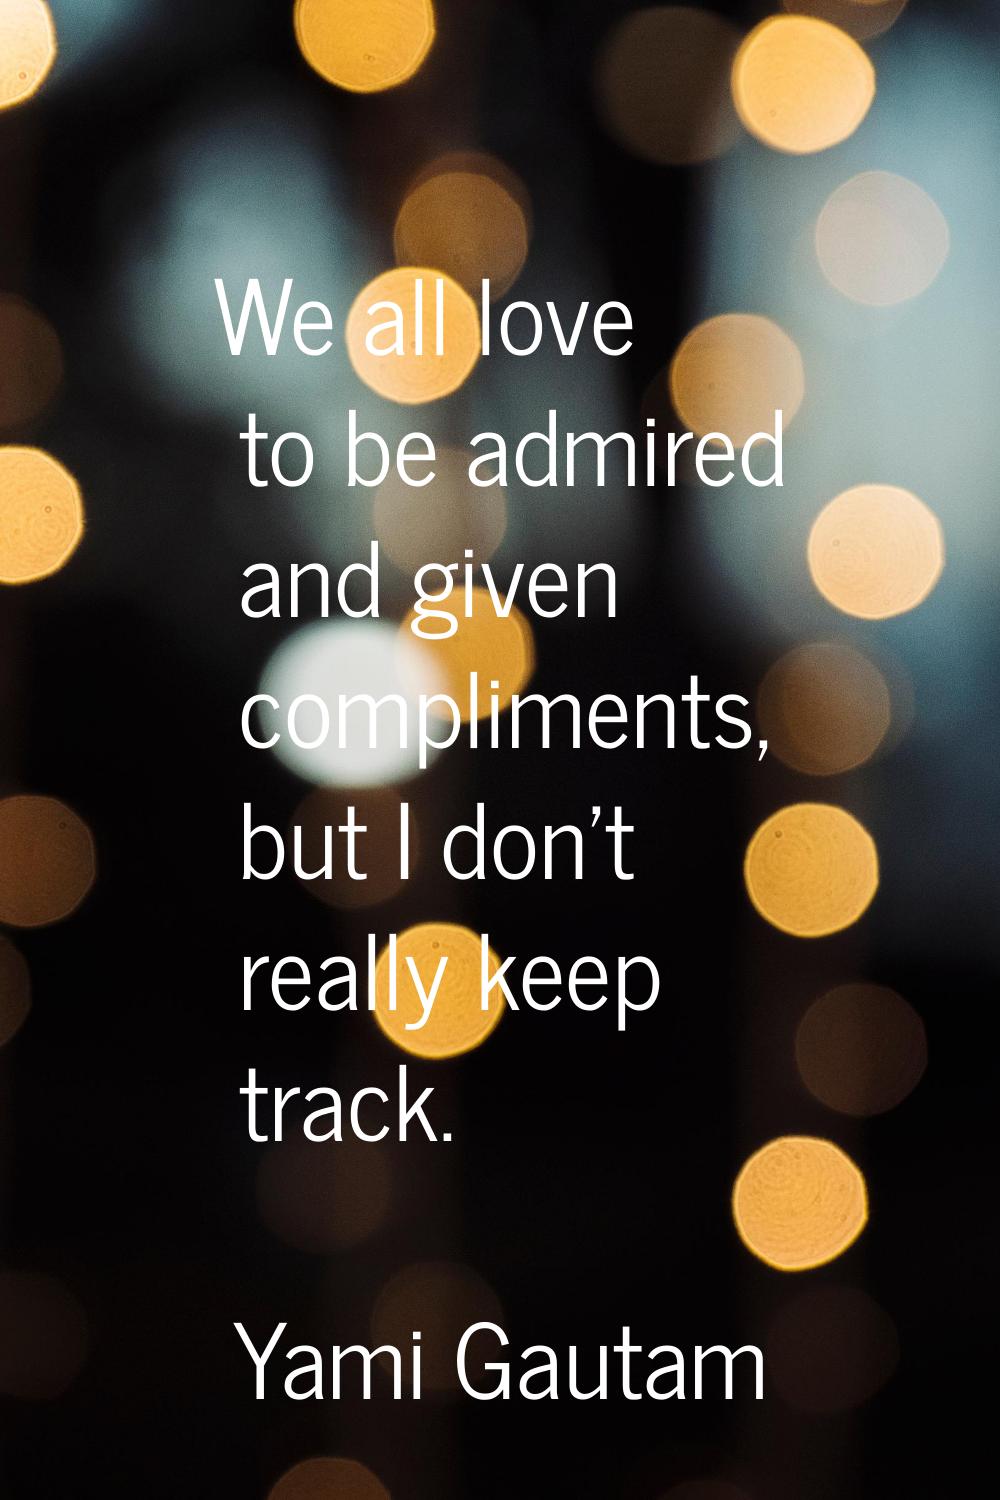 We all love to be admired and given compliments, but I don't really keep track.